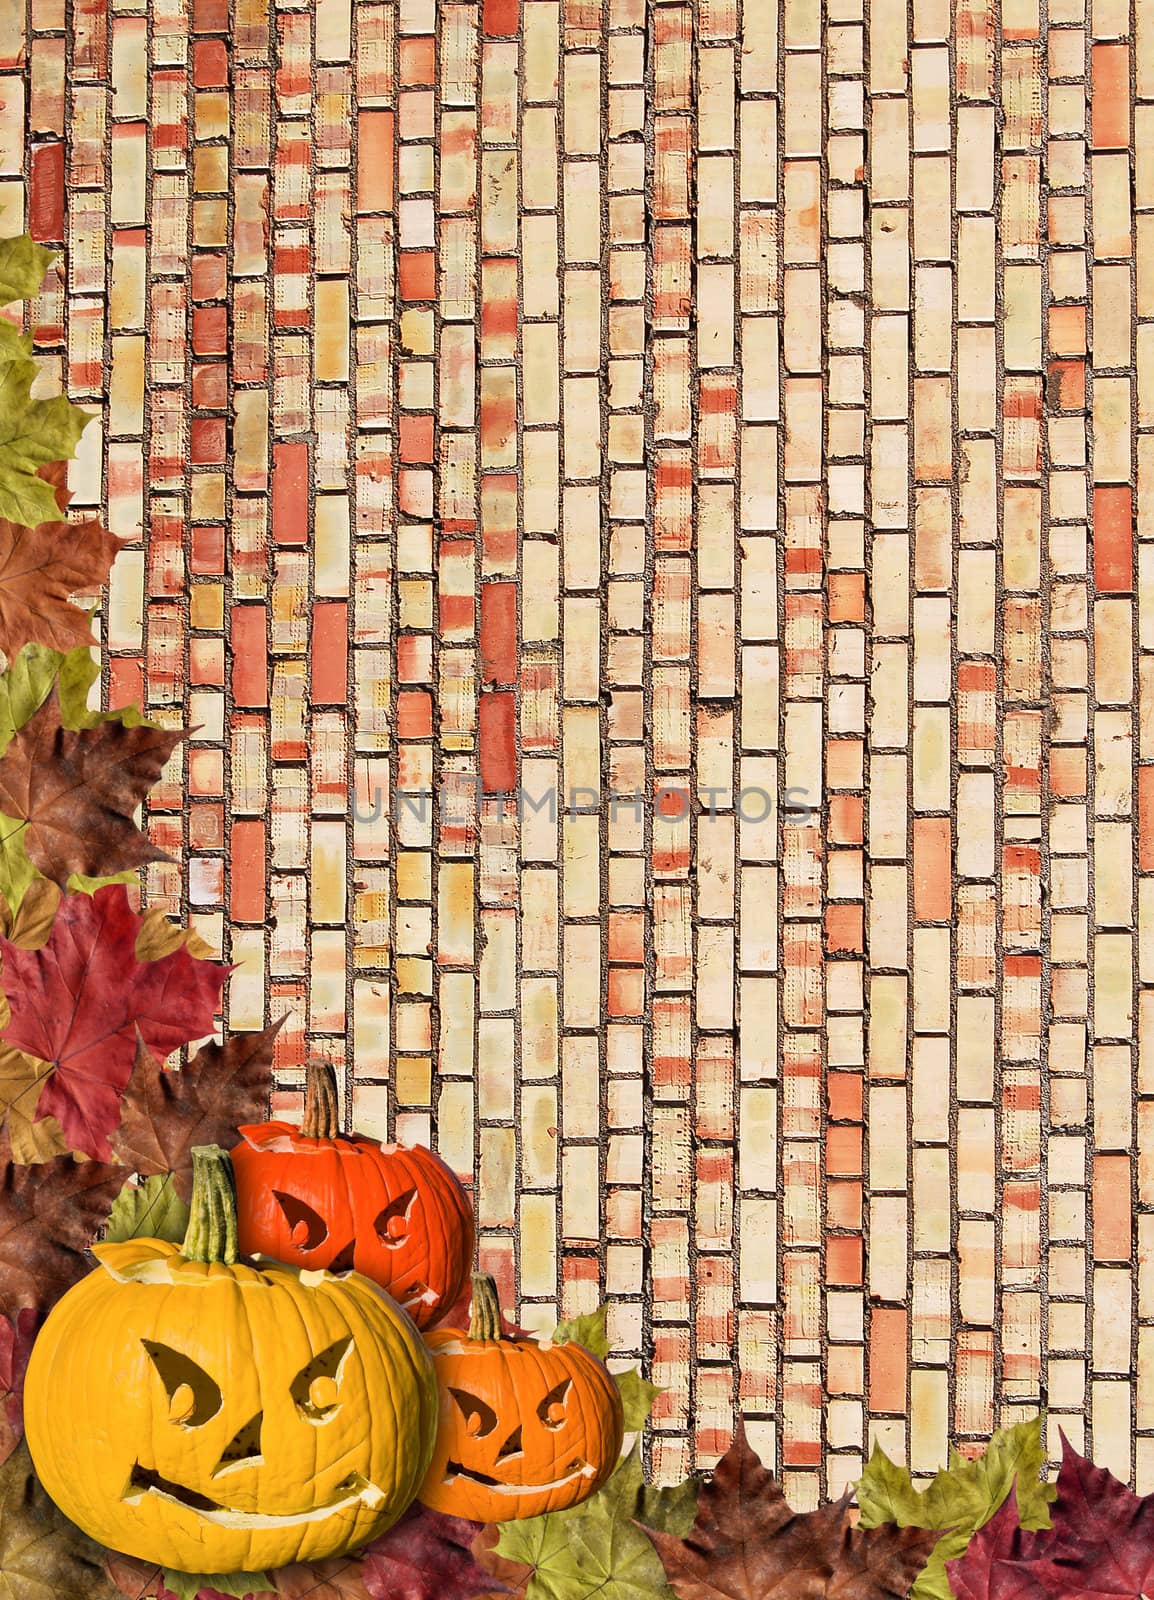 Fall leaves with pumpkin on wall Brick brown background